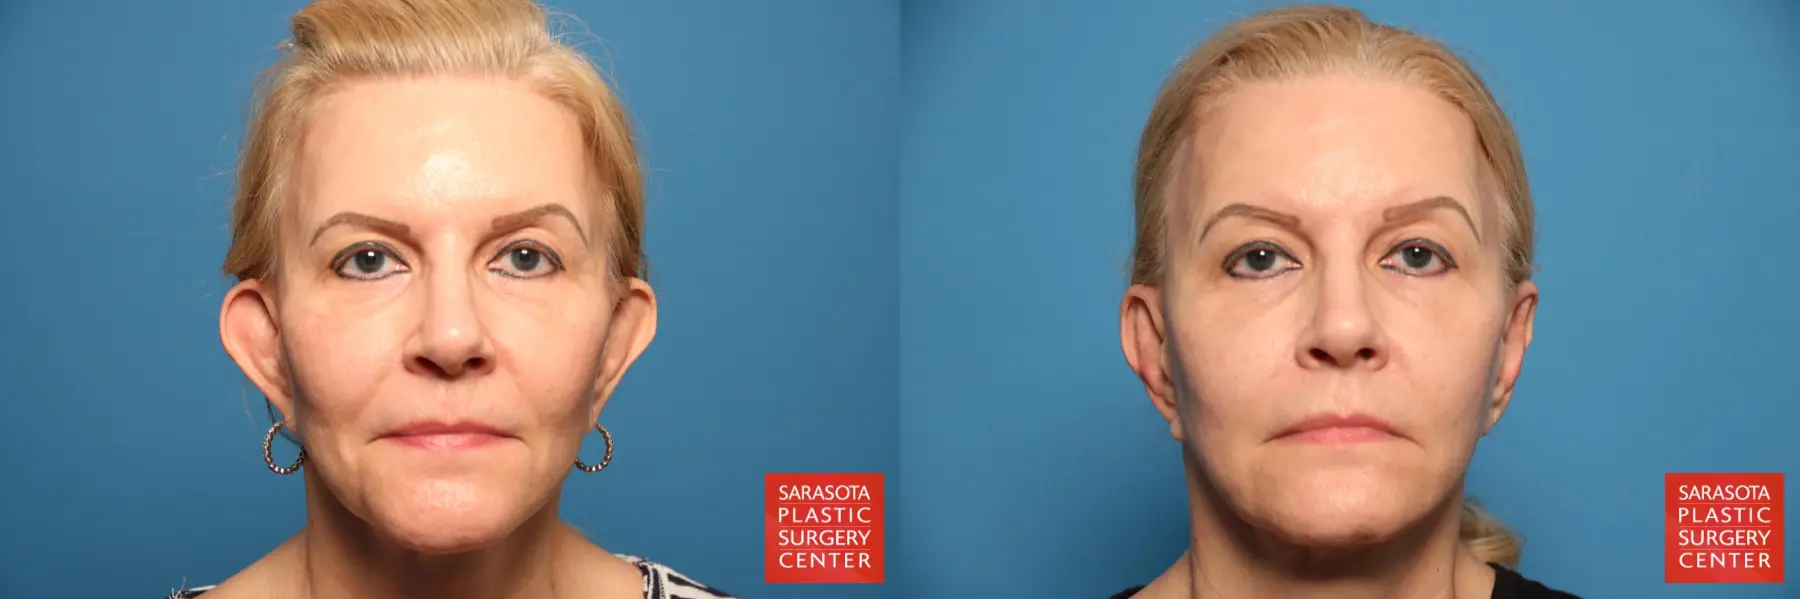 Otoplasty And Earlobe Repair: Patient 1 - Before and After  